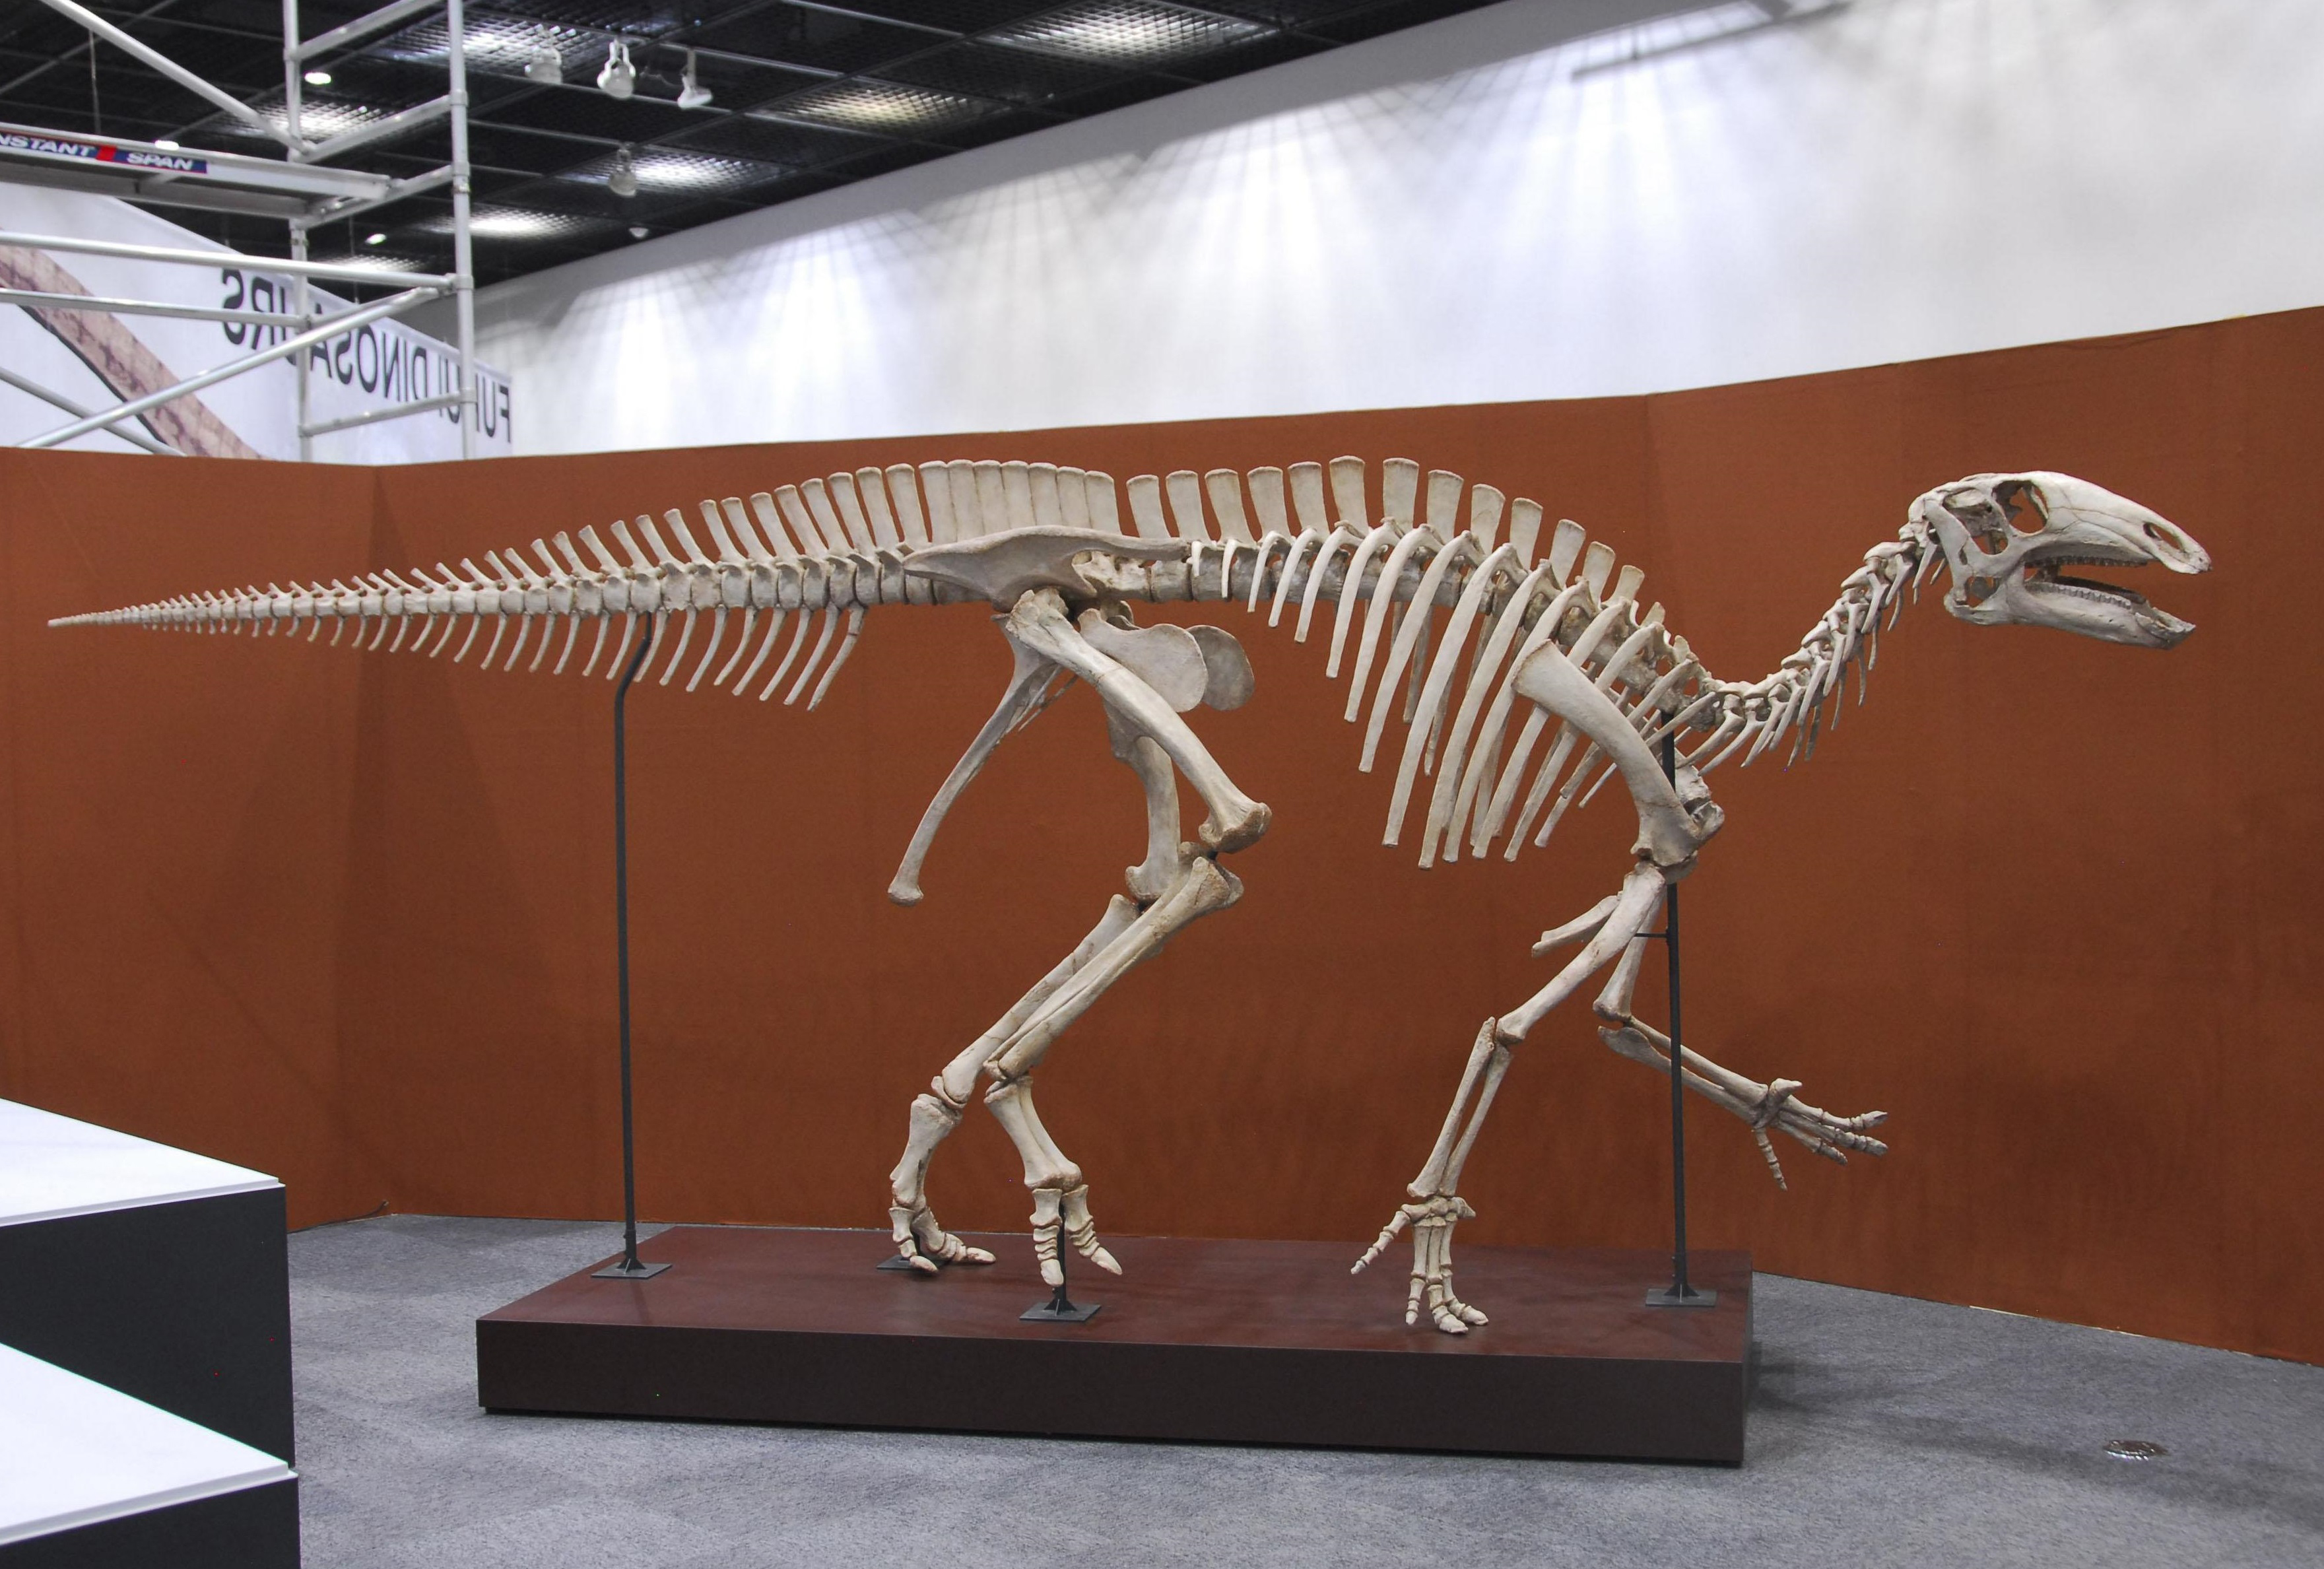 A new species of iguanodon will go on display at a museum in Fukui this month. | FUKUI PREFECTURAL DINOSAUR MUSEUM / KYODO